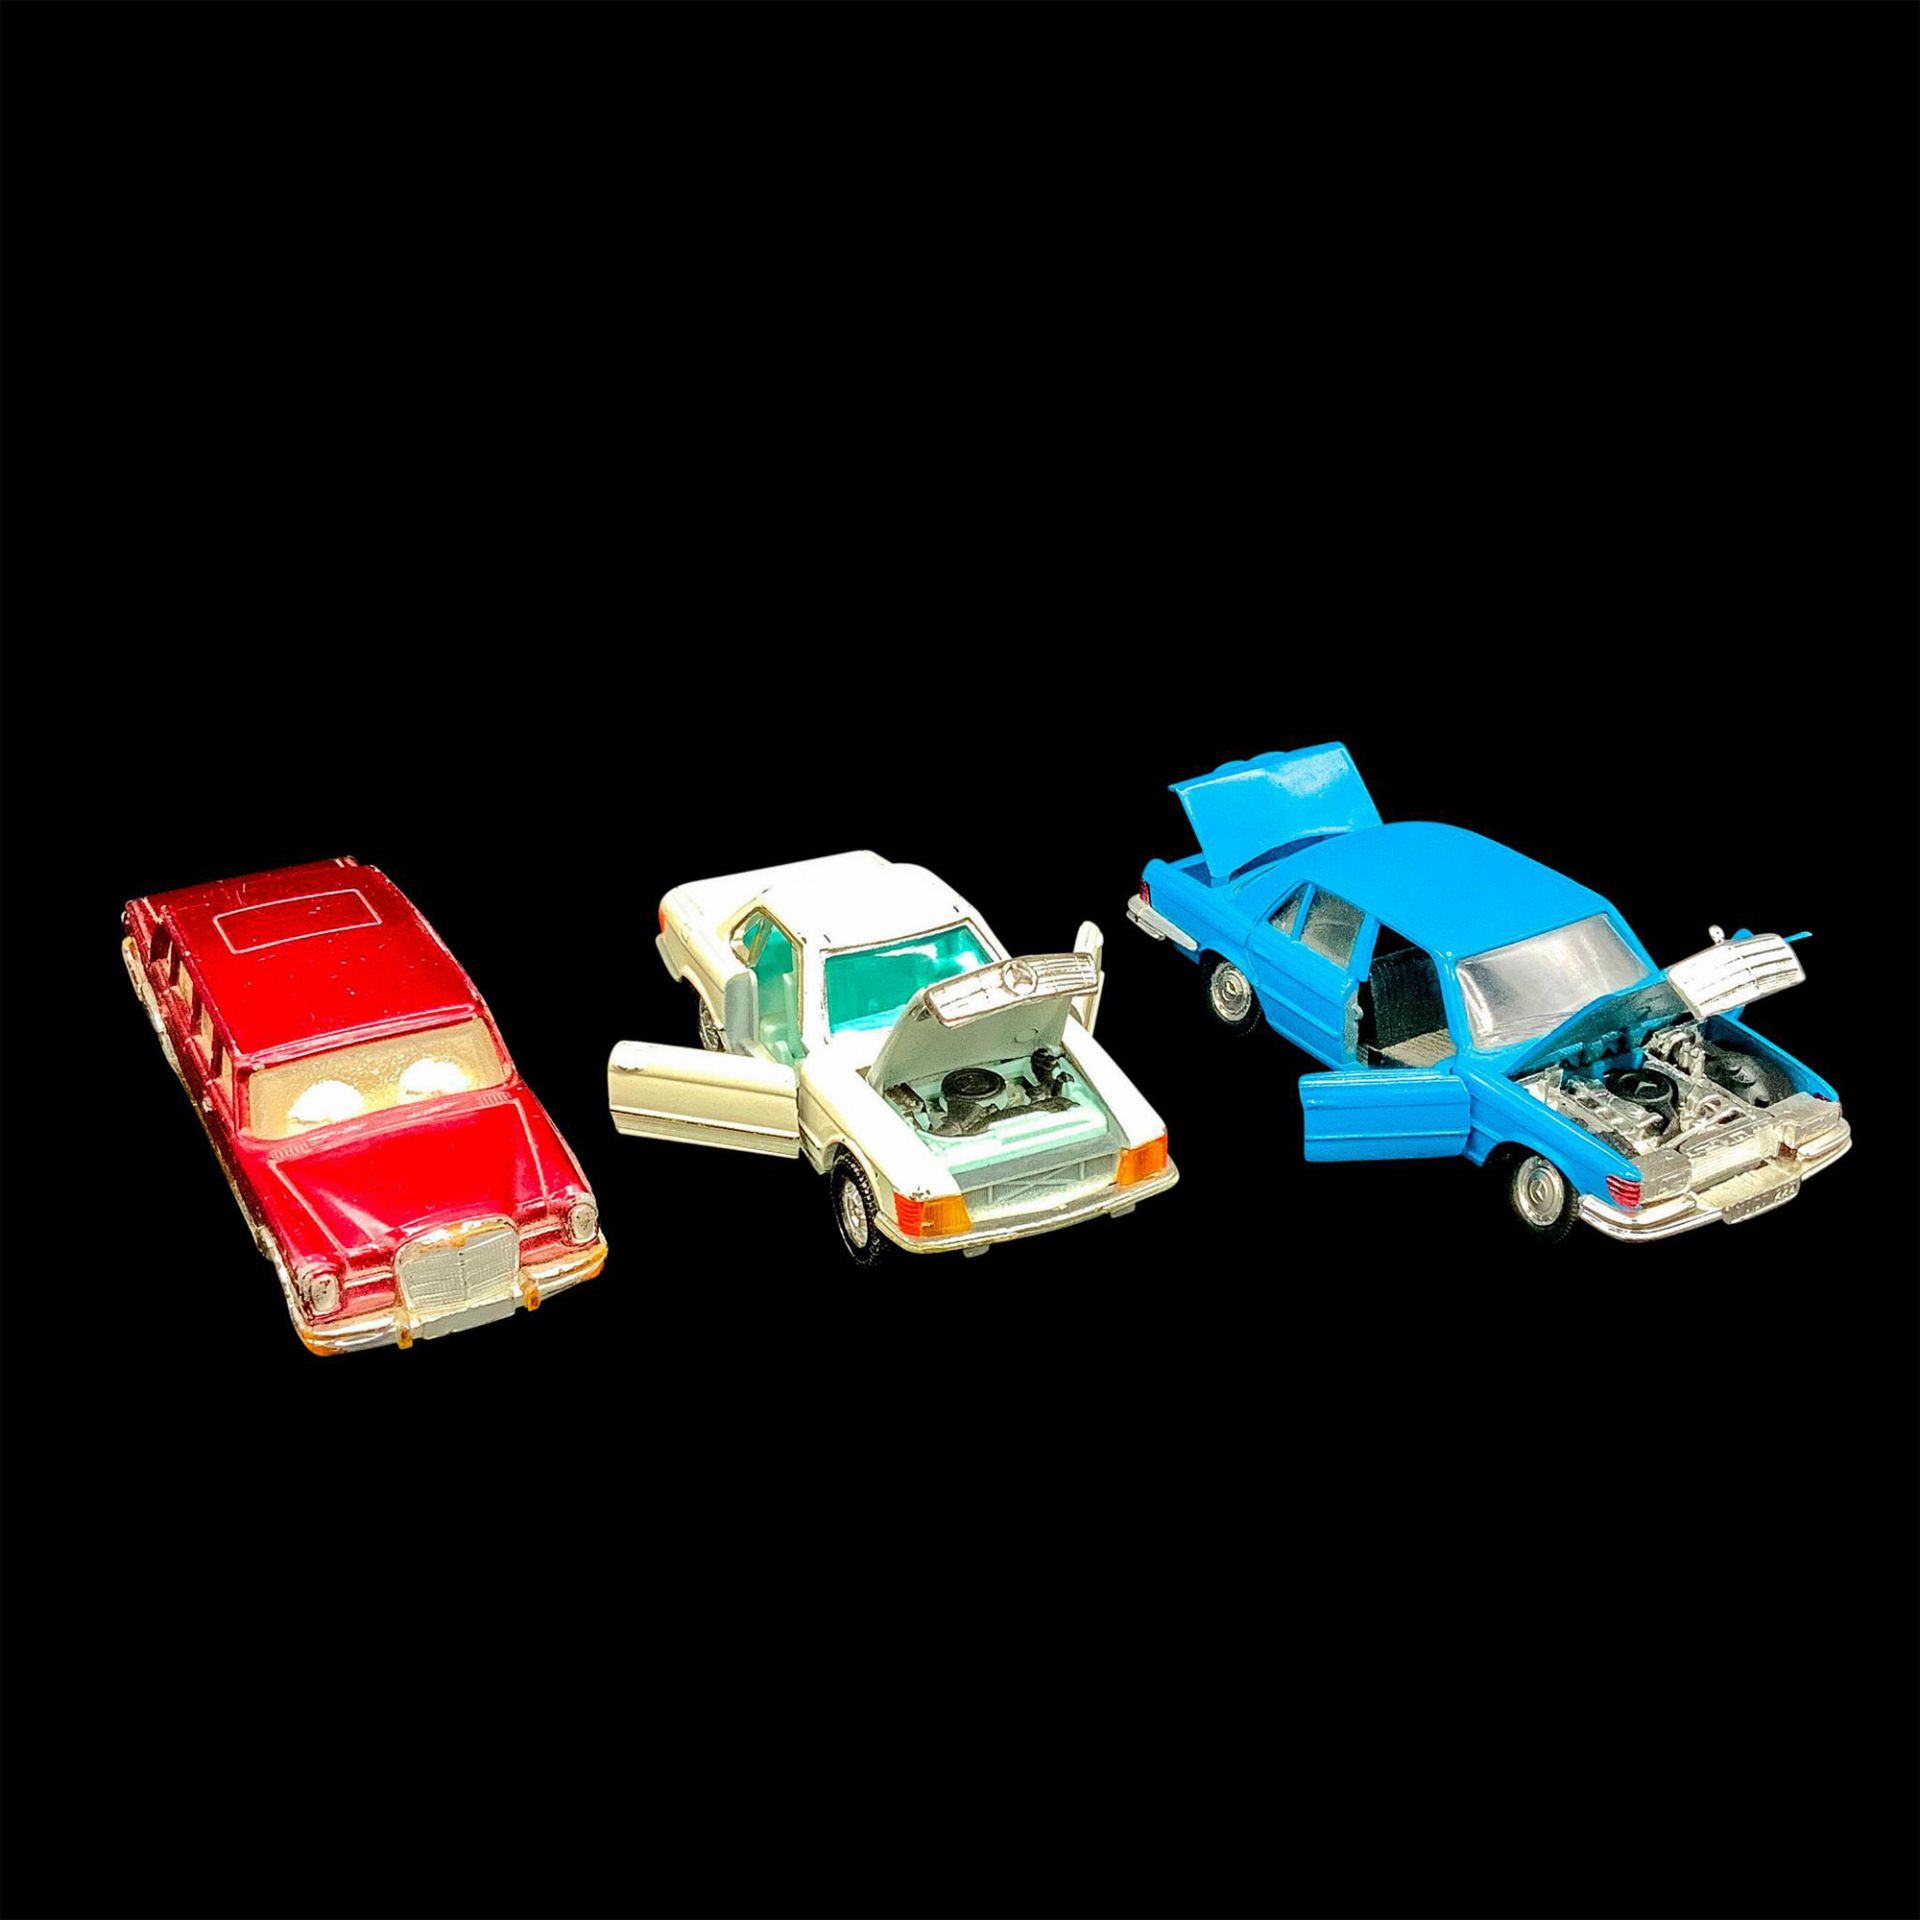 3pc Schuco Mercedes Matchbox Cars Collection - Image 3 of 4